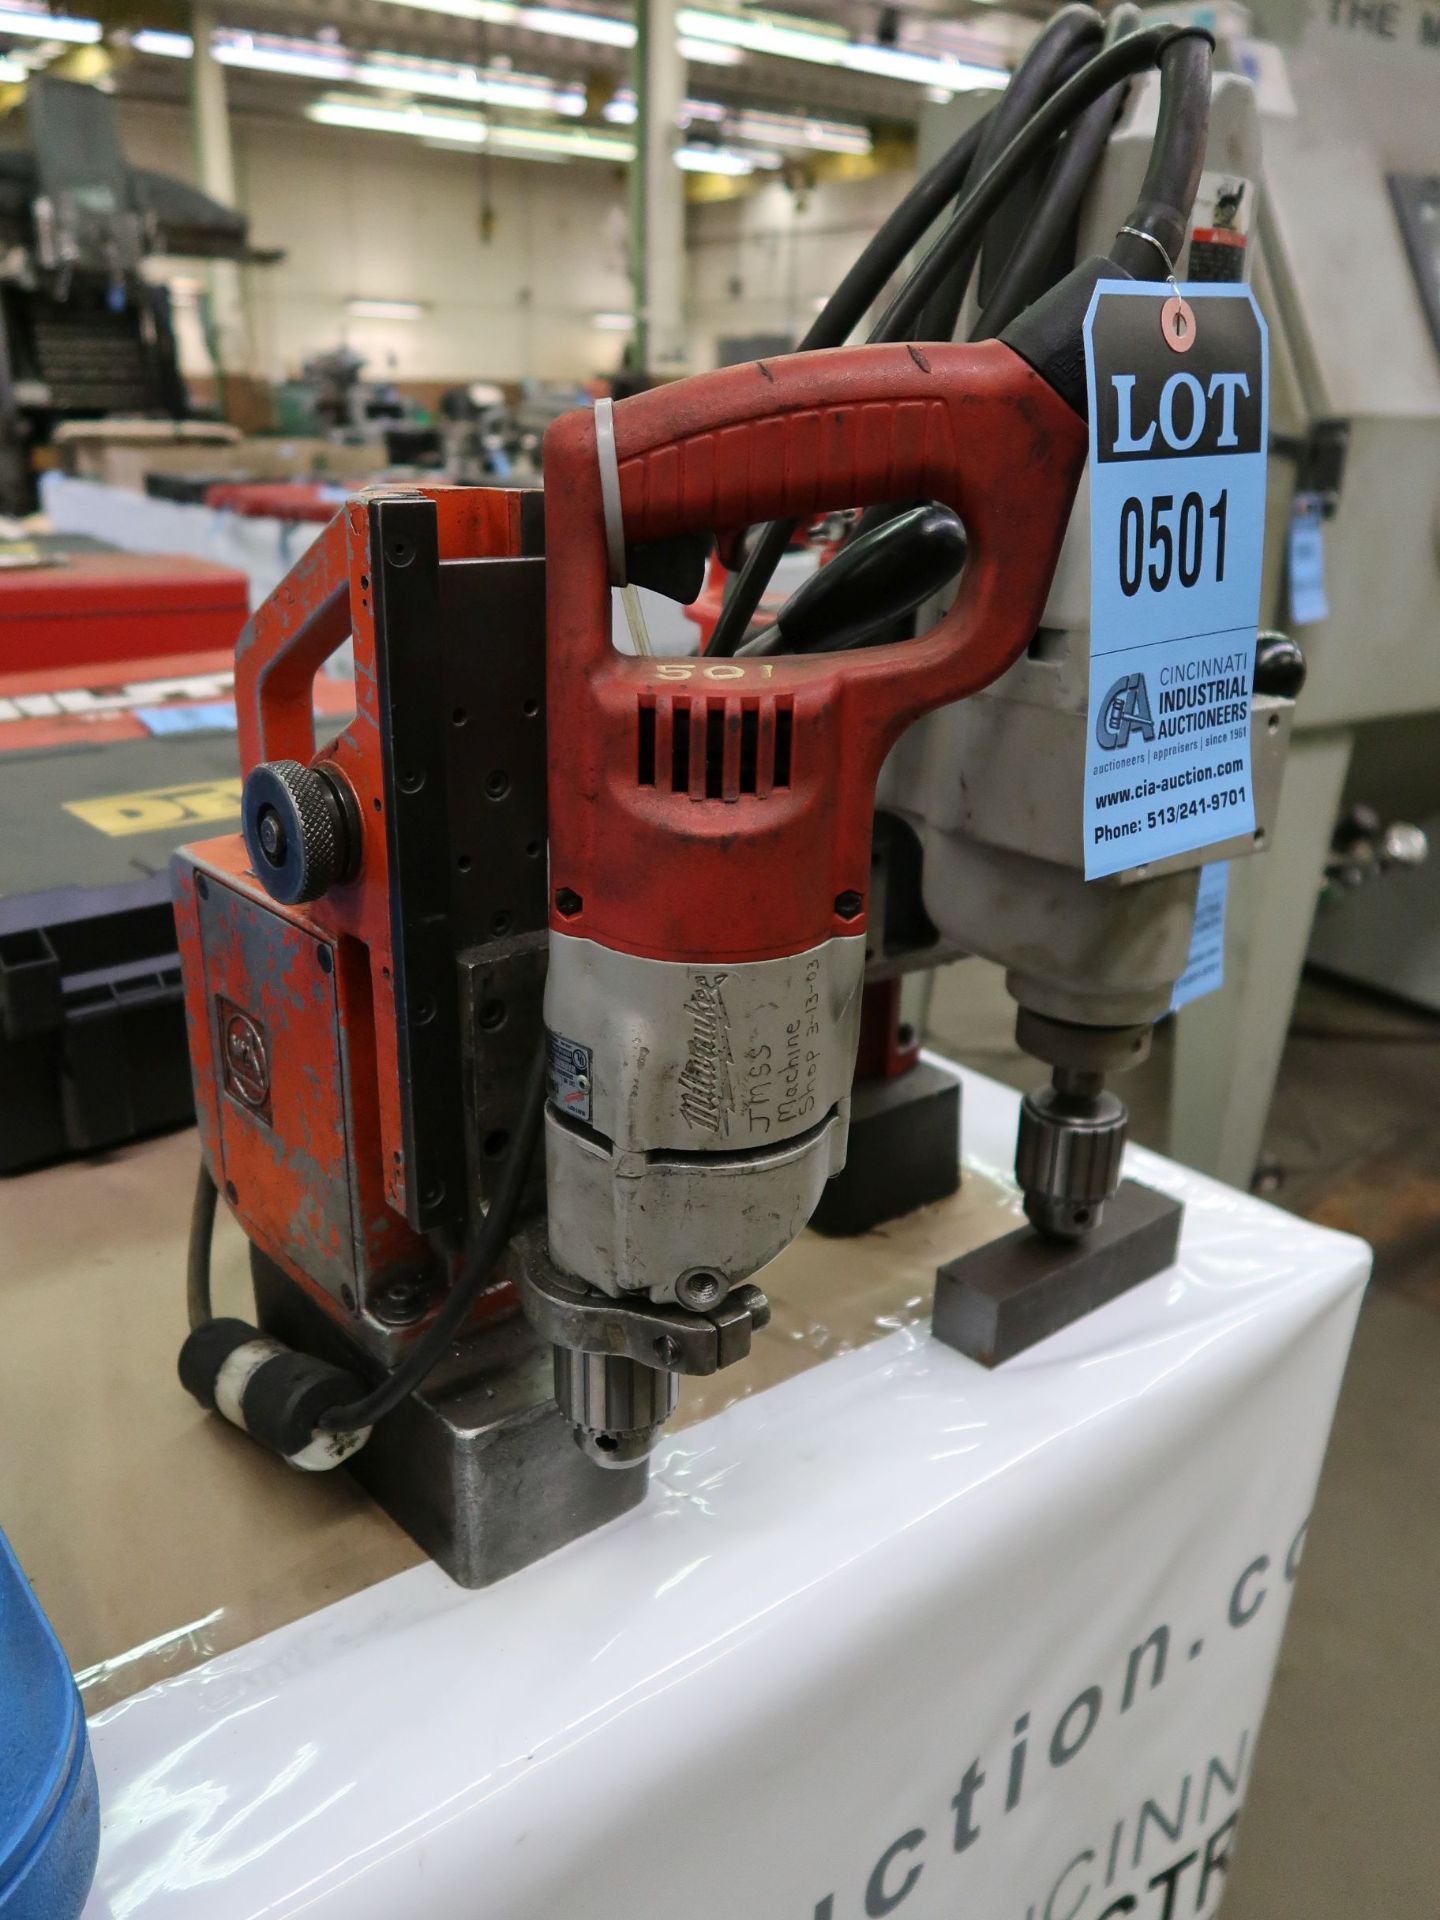 1/2" MILWAUKEE MAGNETIC BASE DRILL